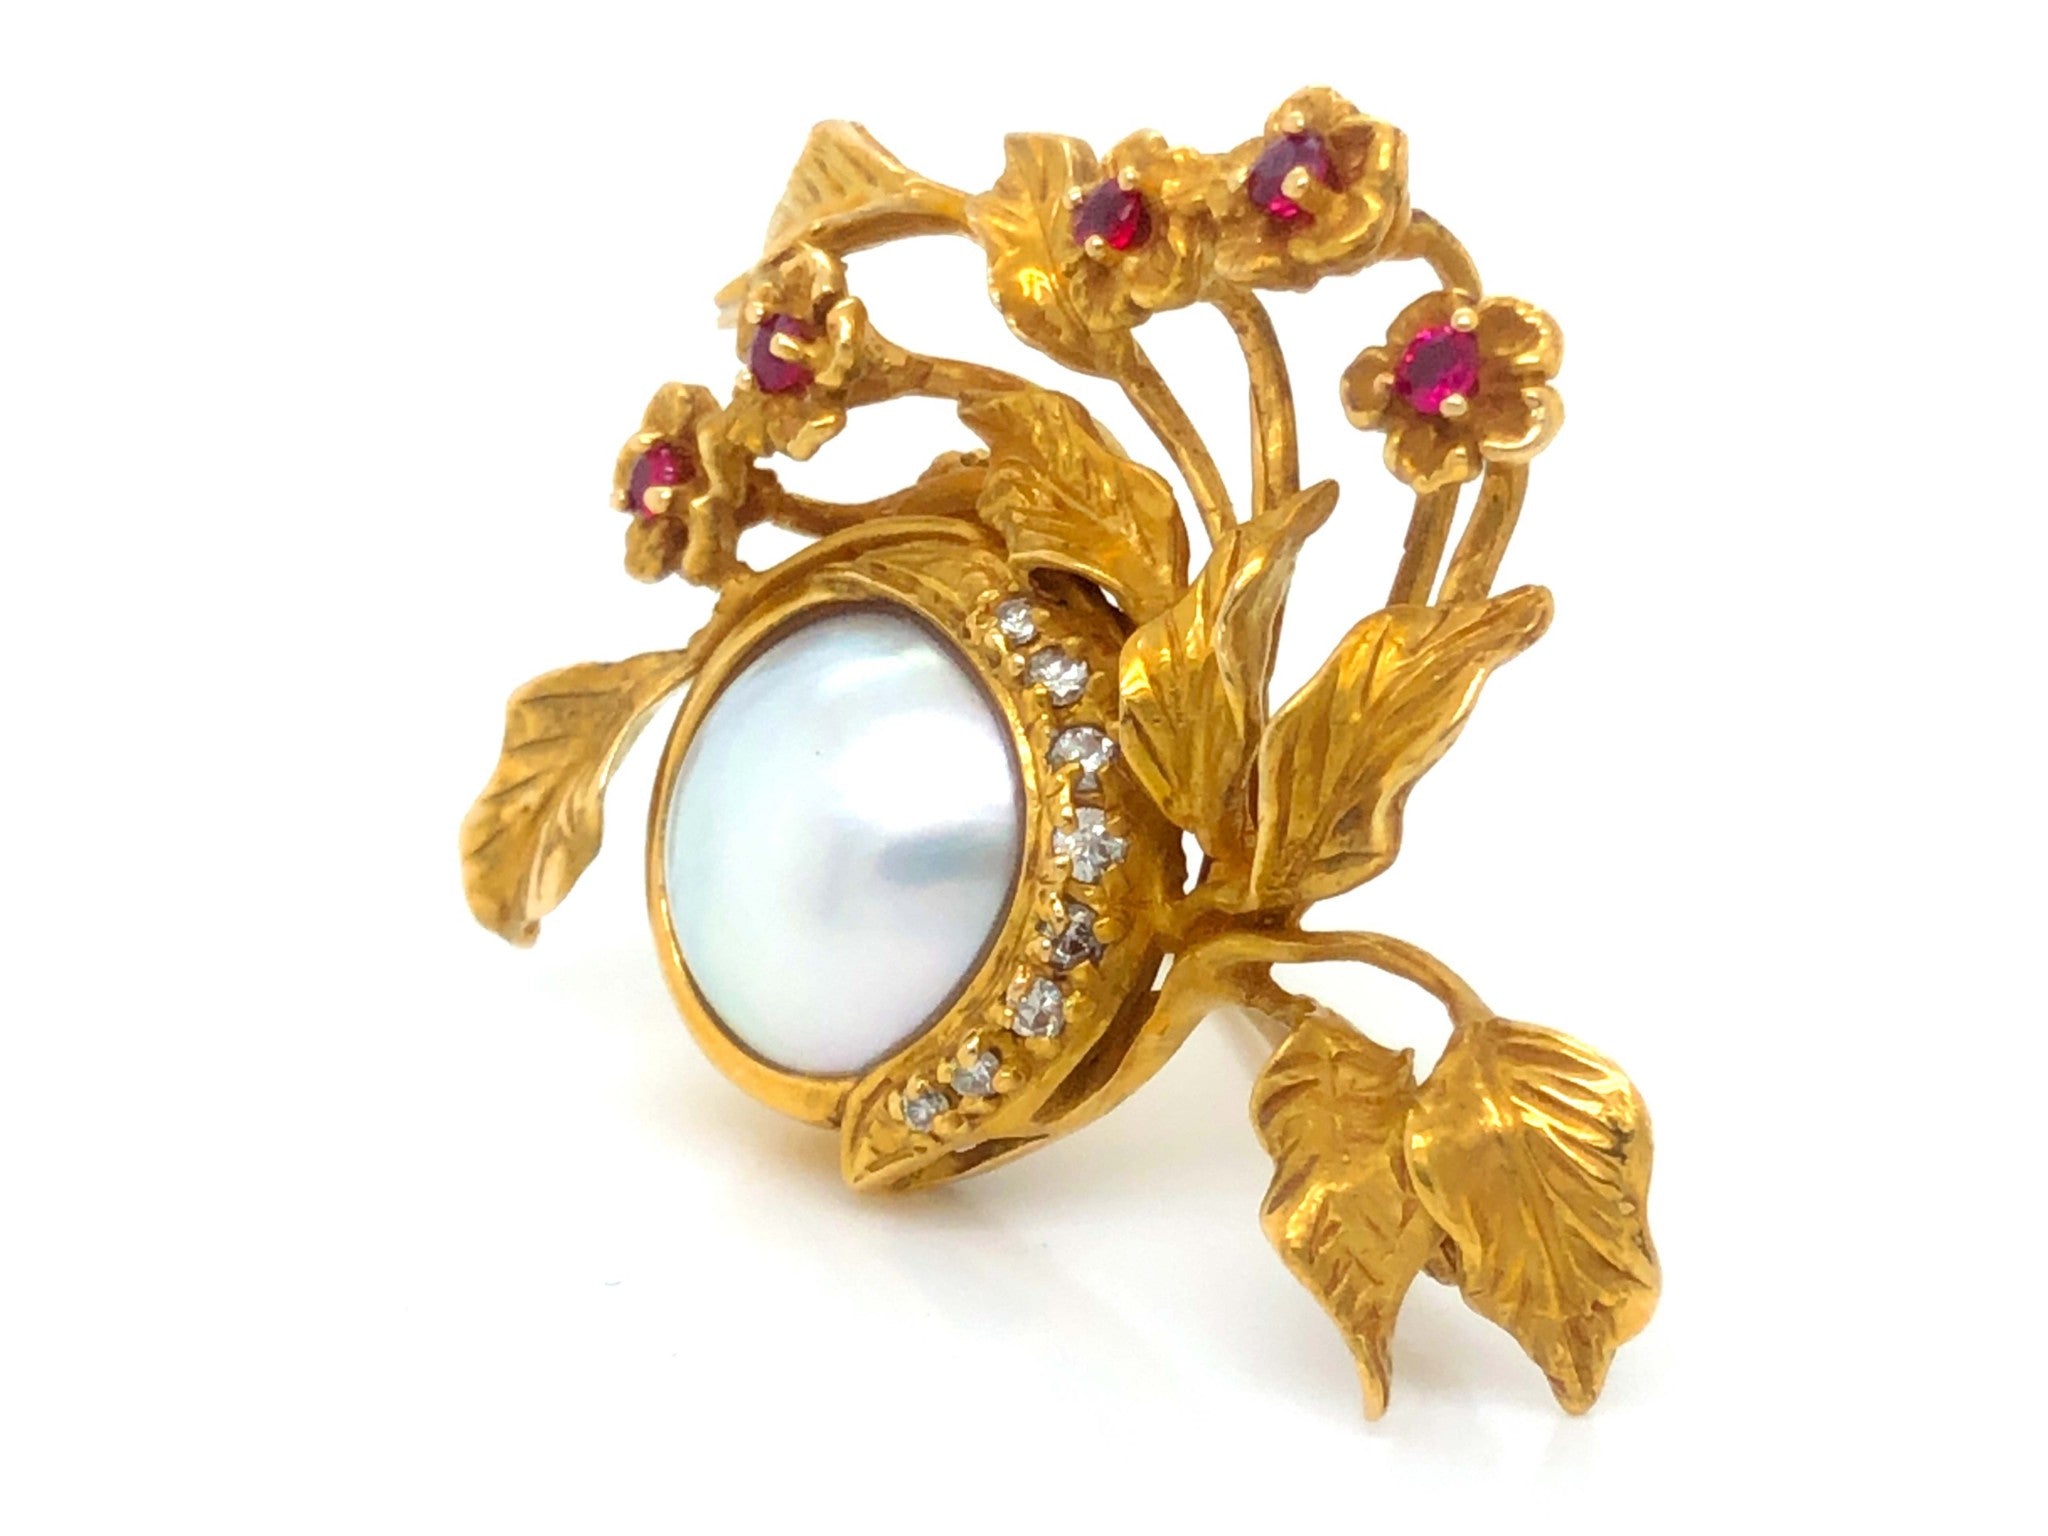 Givenchy Diamond, Ruby and Mabe Pearl Brooch in 14k Yellow Gold